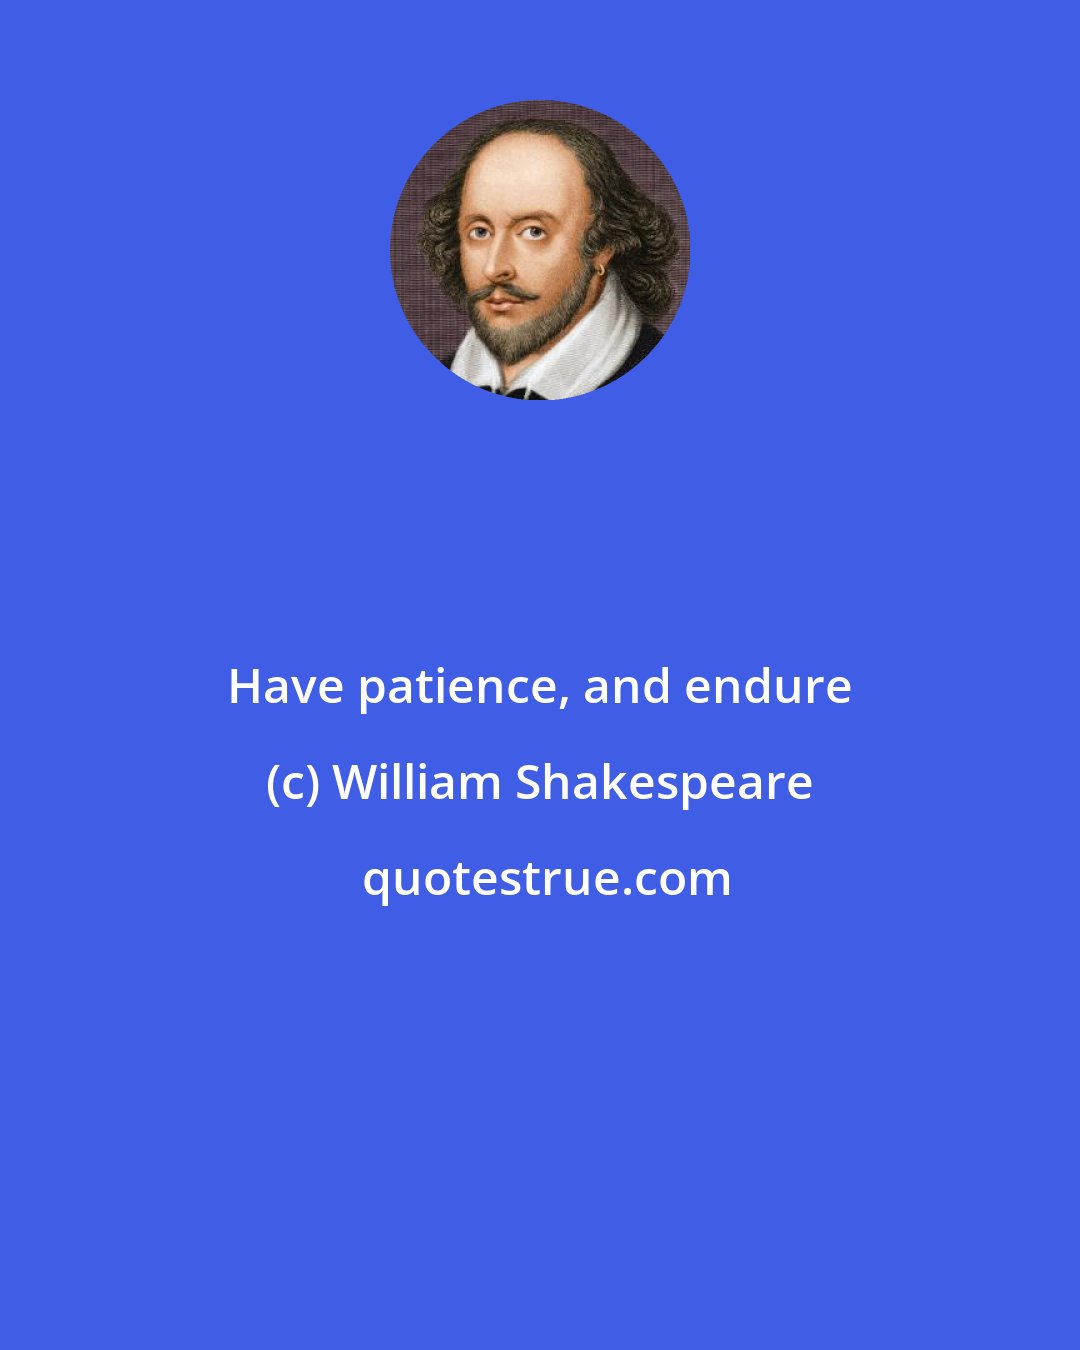 William Shakespeare: Have patience, and endure